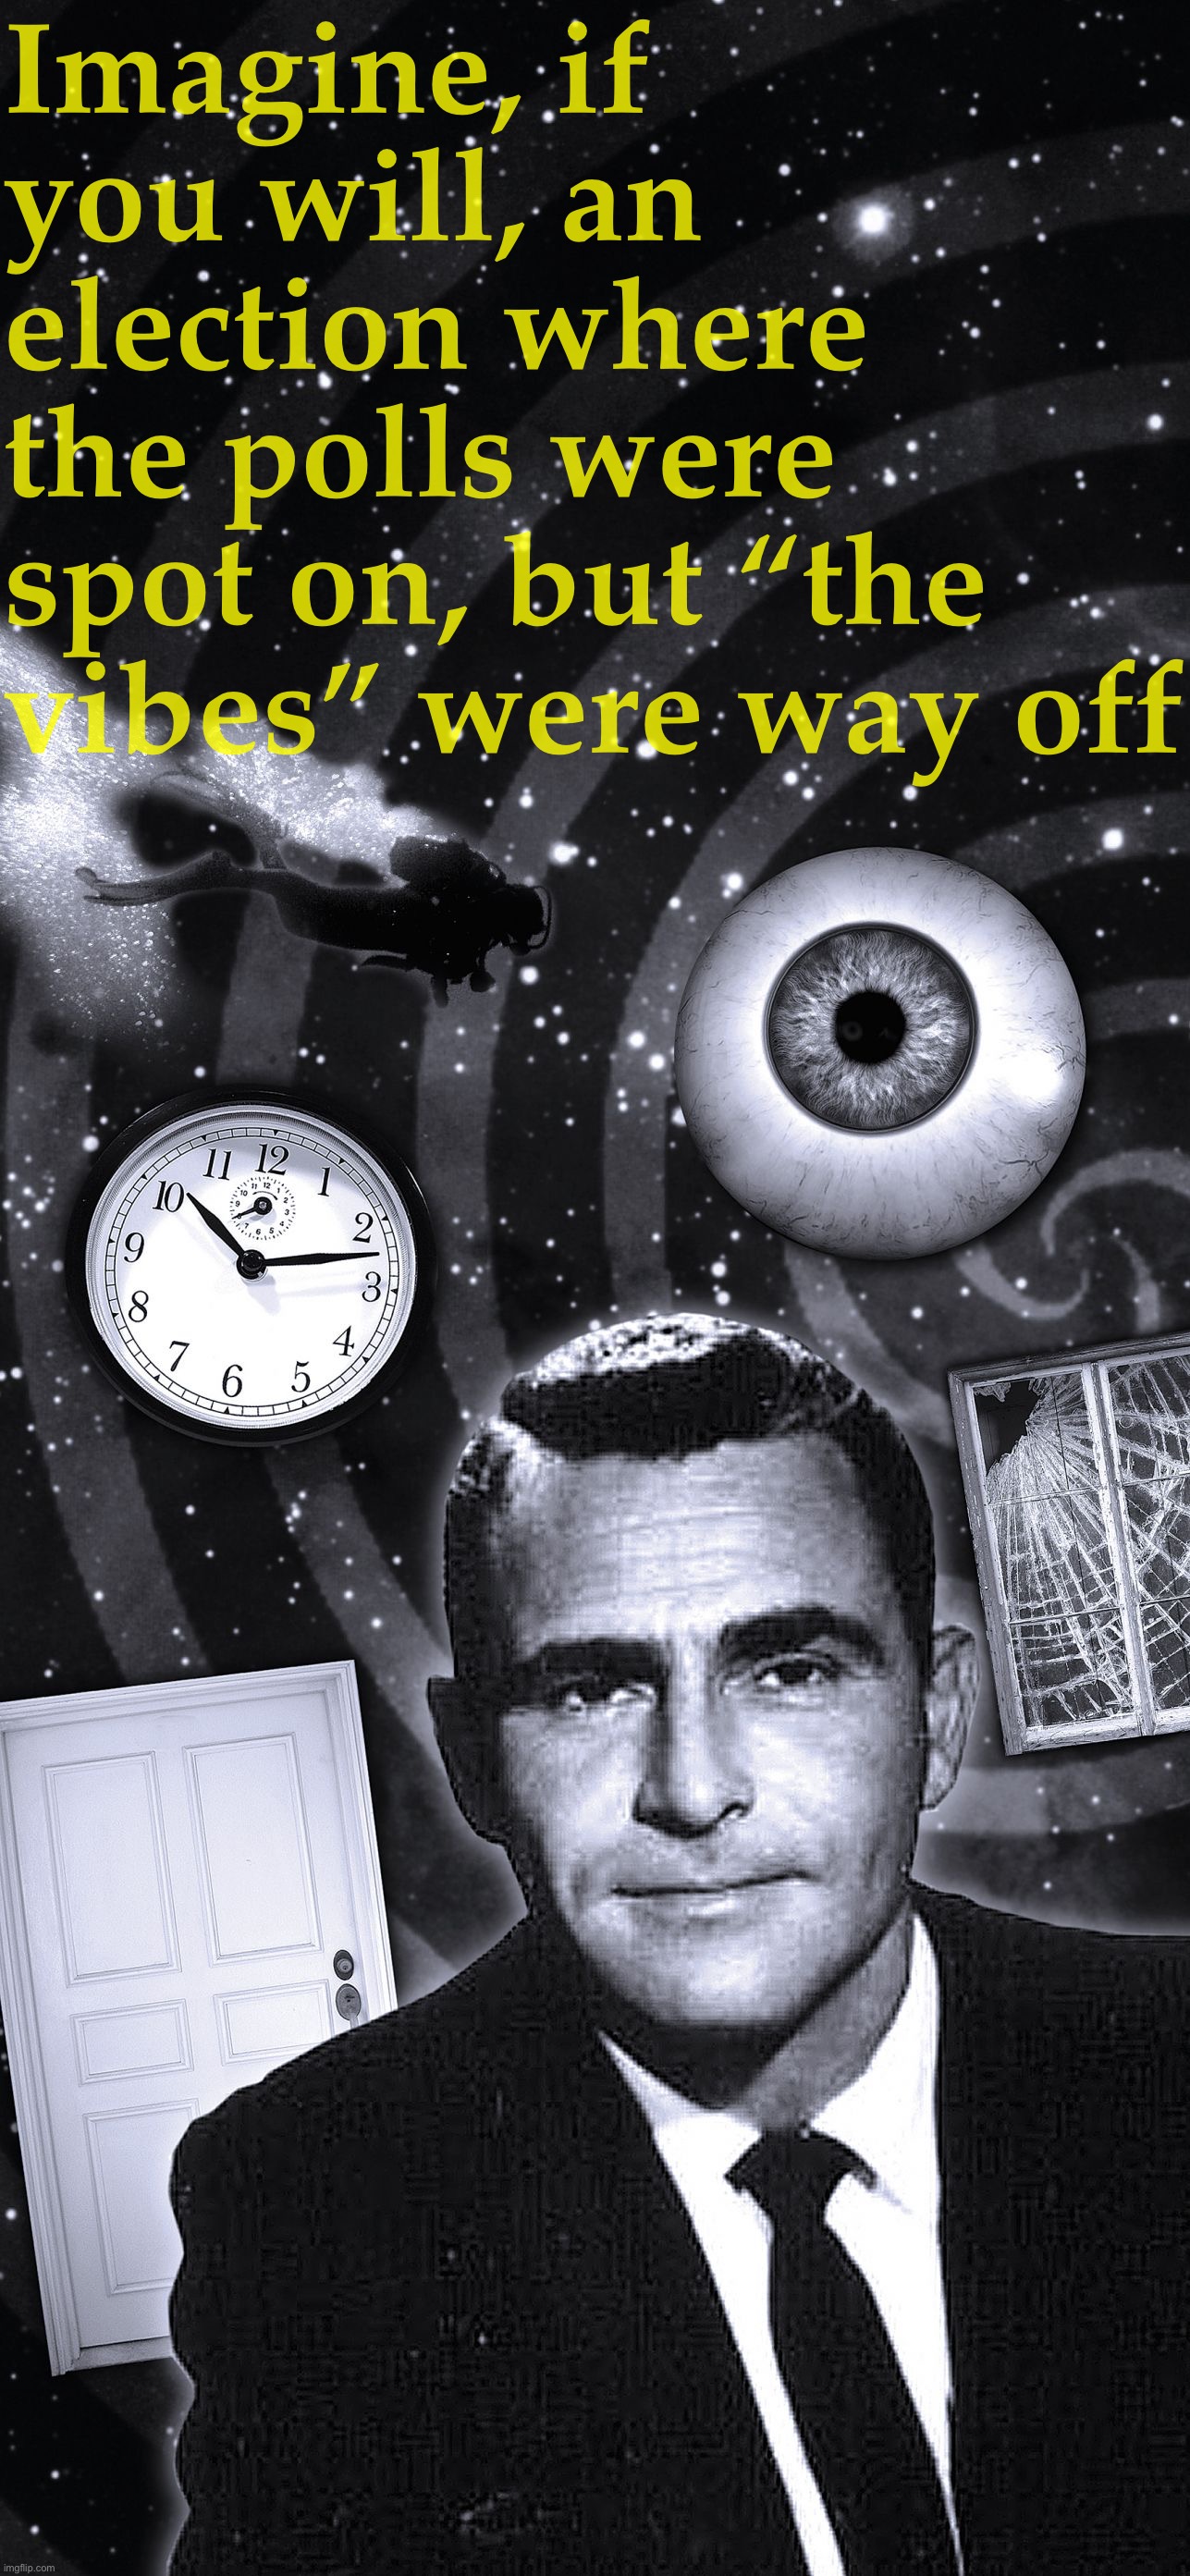 Another unexpected winner of the night: Pollsters | Imagine, if you will, an election where the polls were spot on, but “the vibes” were way off | image tagged in twilight zone,polls,2022,midterms,elections,politics | made w/ Imgflip meme maker